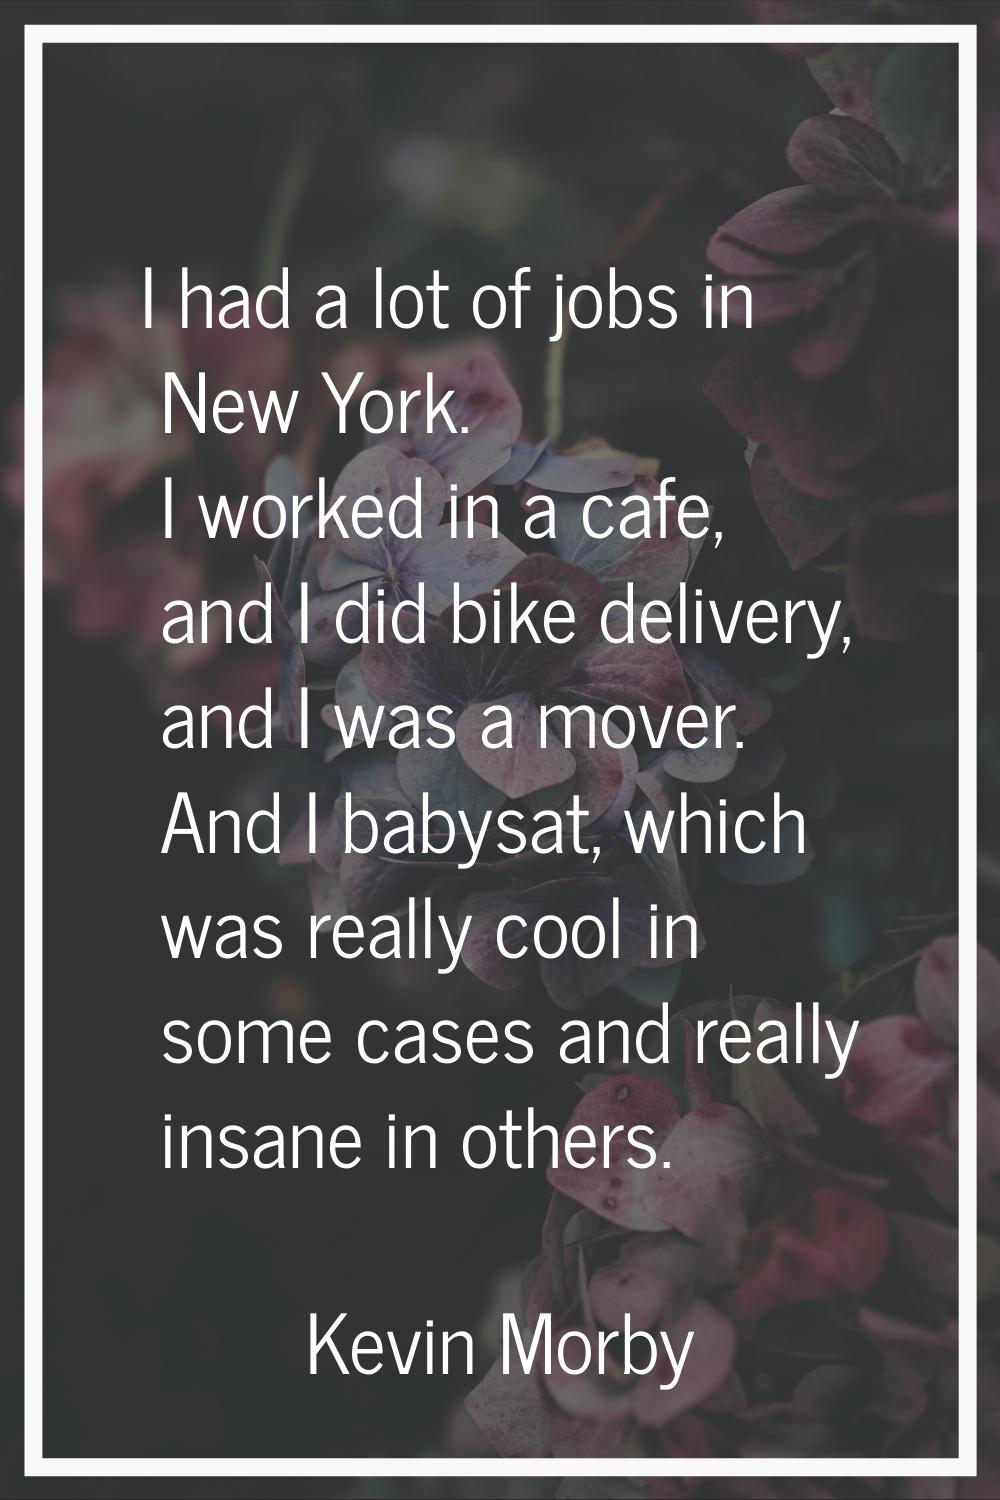 I had a lot of jobs in New York. I worked in a cafe, and I did bike delivery, and I was a mover. An